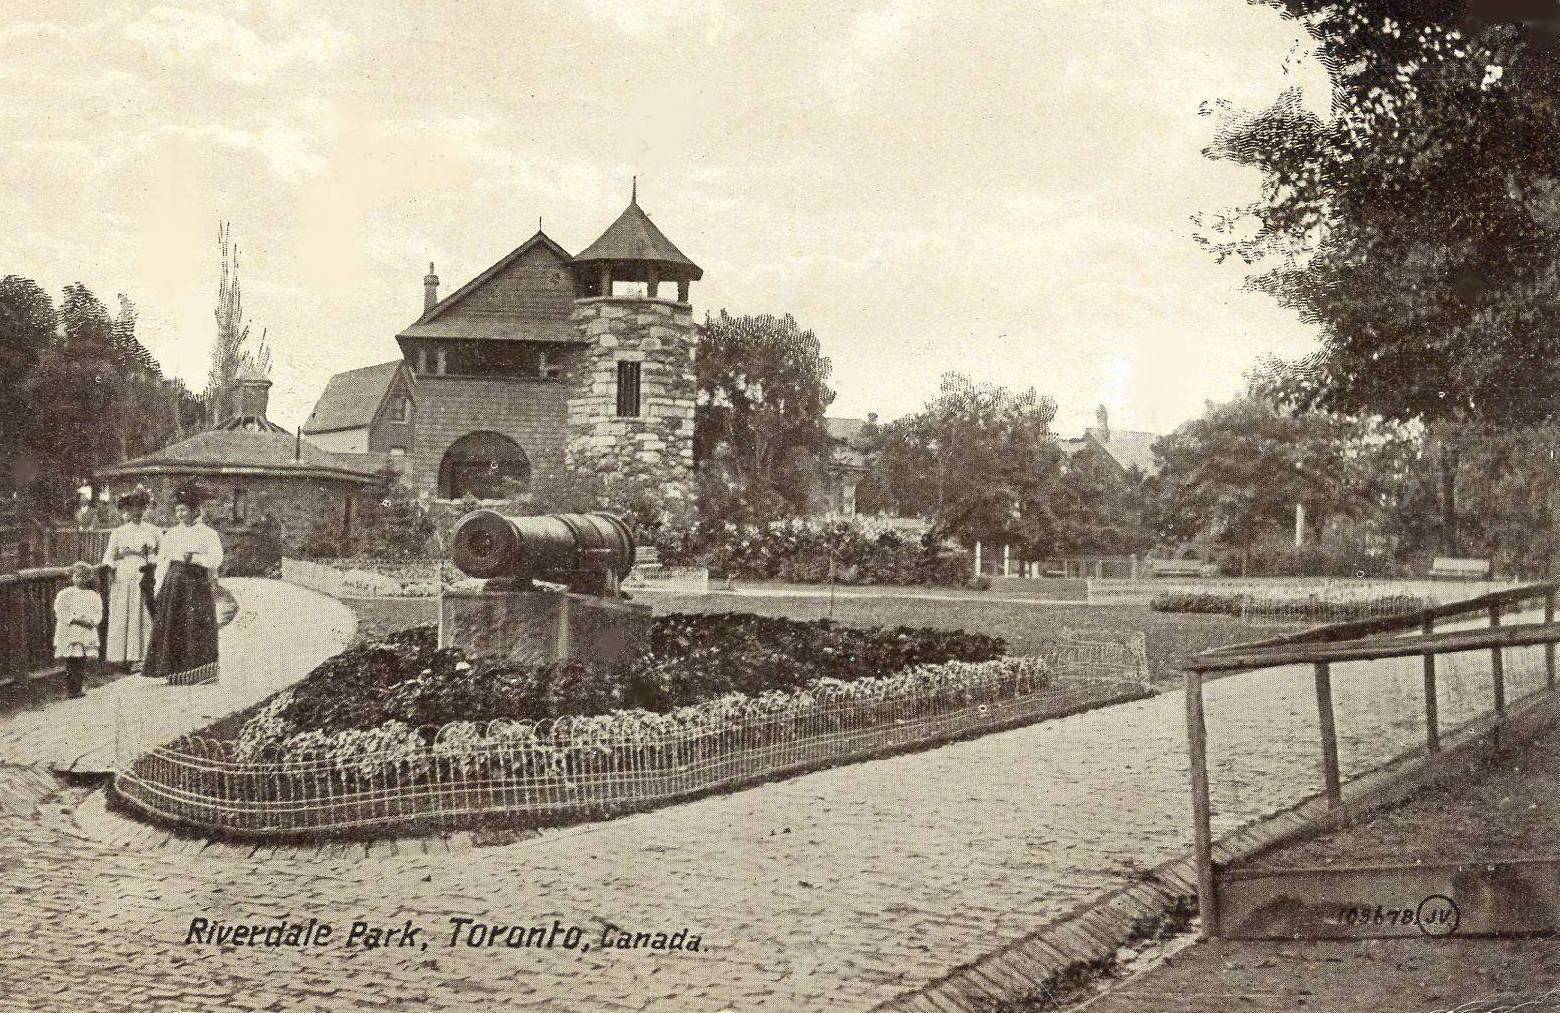 POSTCARD - TORONTO - RIVERDALE PARK - TWO WOMEN AND A CHILD WALKING BY GARDEN AREA WITH ANTIQUE CANNON - NICE VERSION - 1912